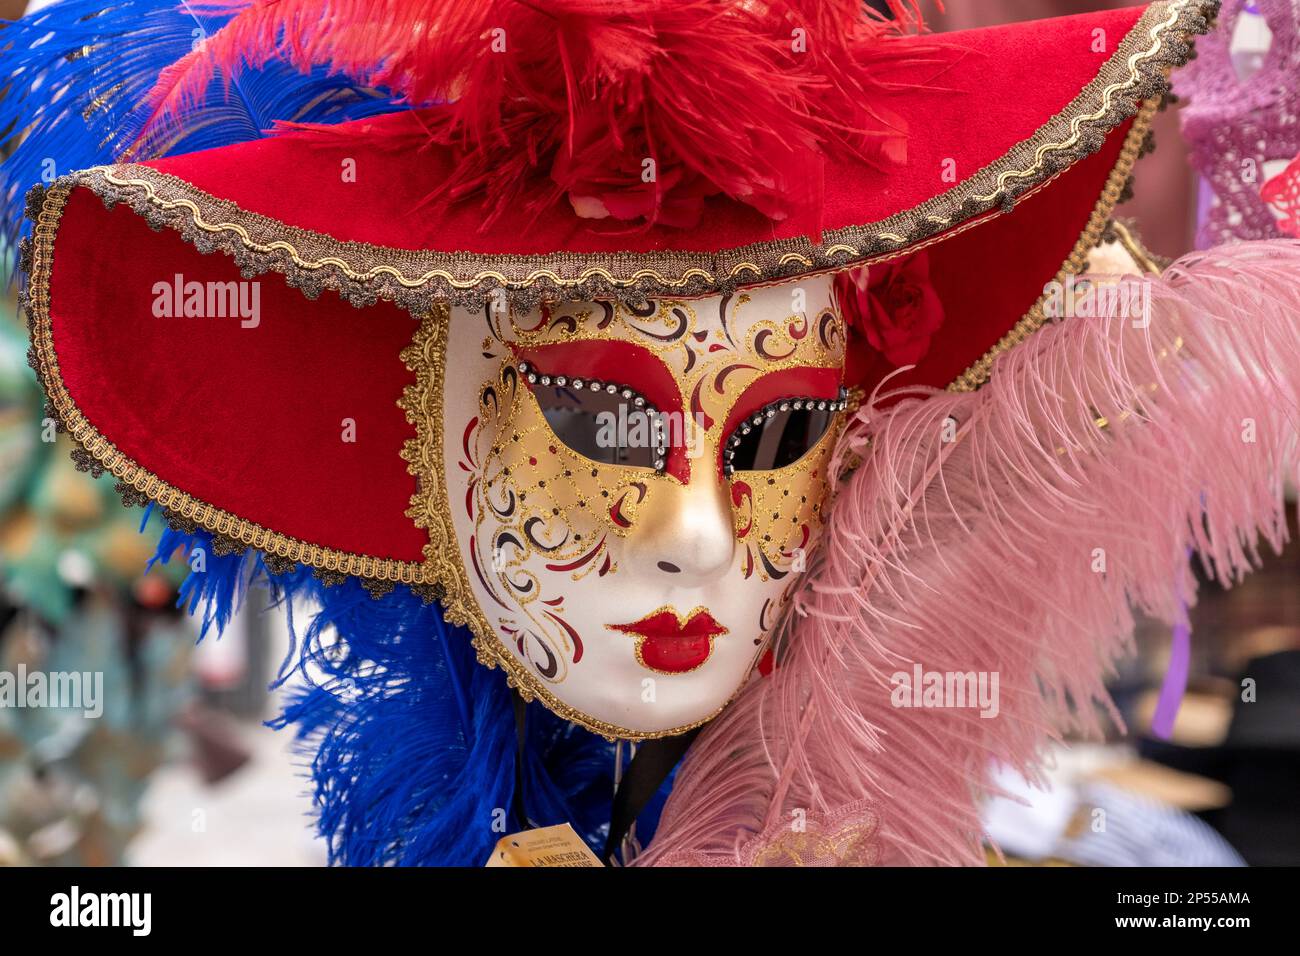 Face mask on display on a street venders stall, Venice, Italy. Stock Photo